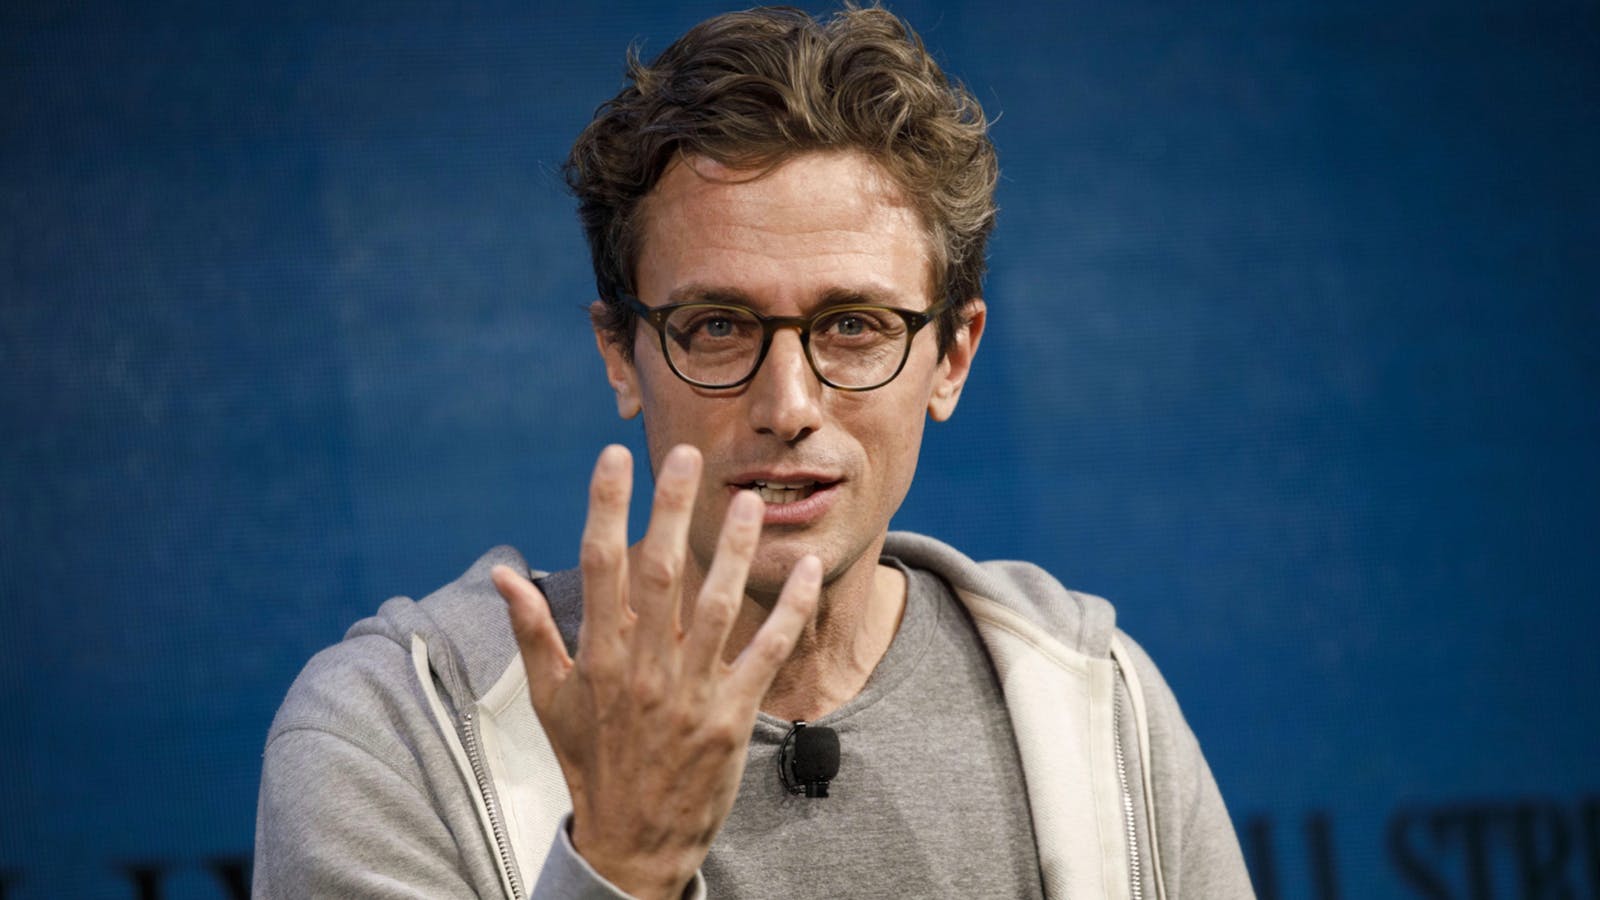 Jonah Peretti, founder and chief executive officer of BuzzFeed. Photo by Bloomberg